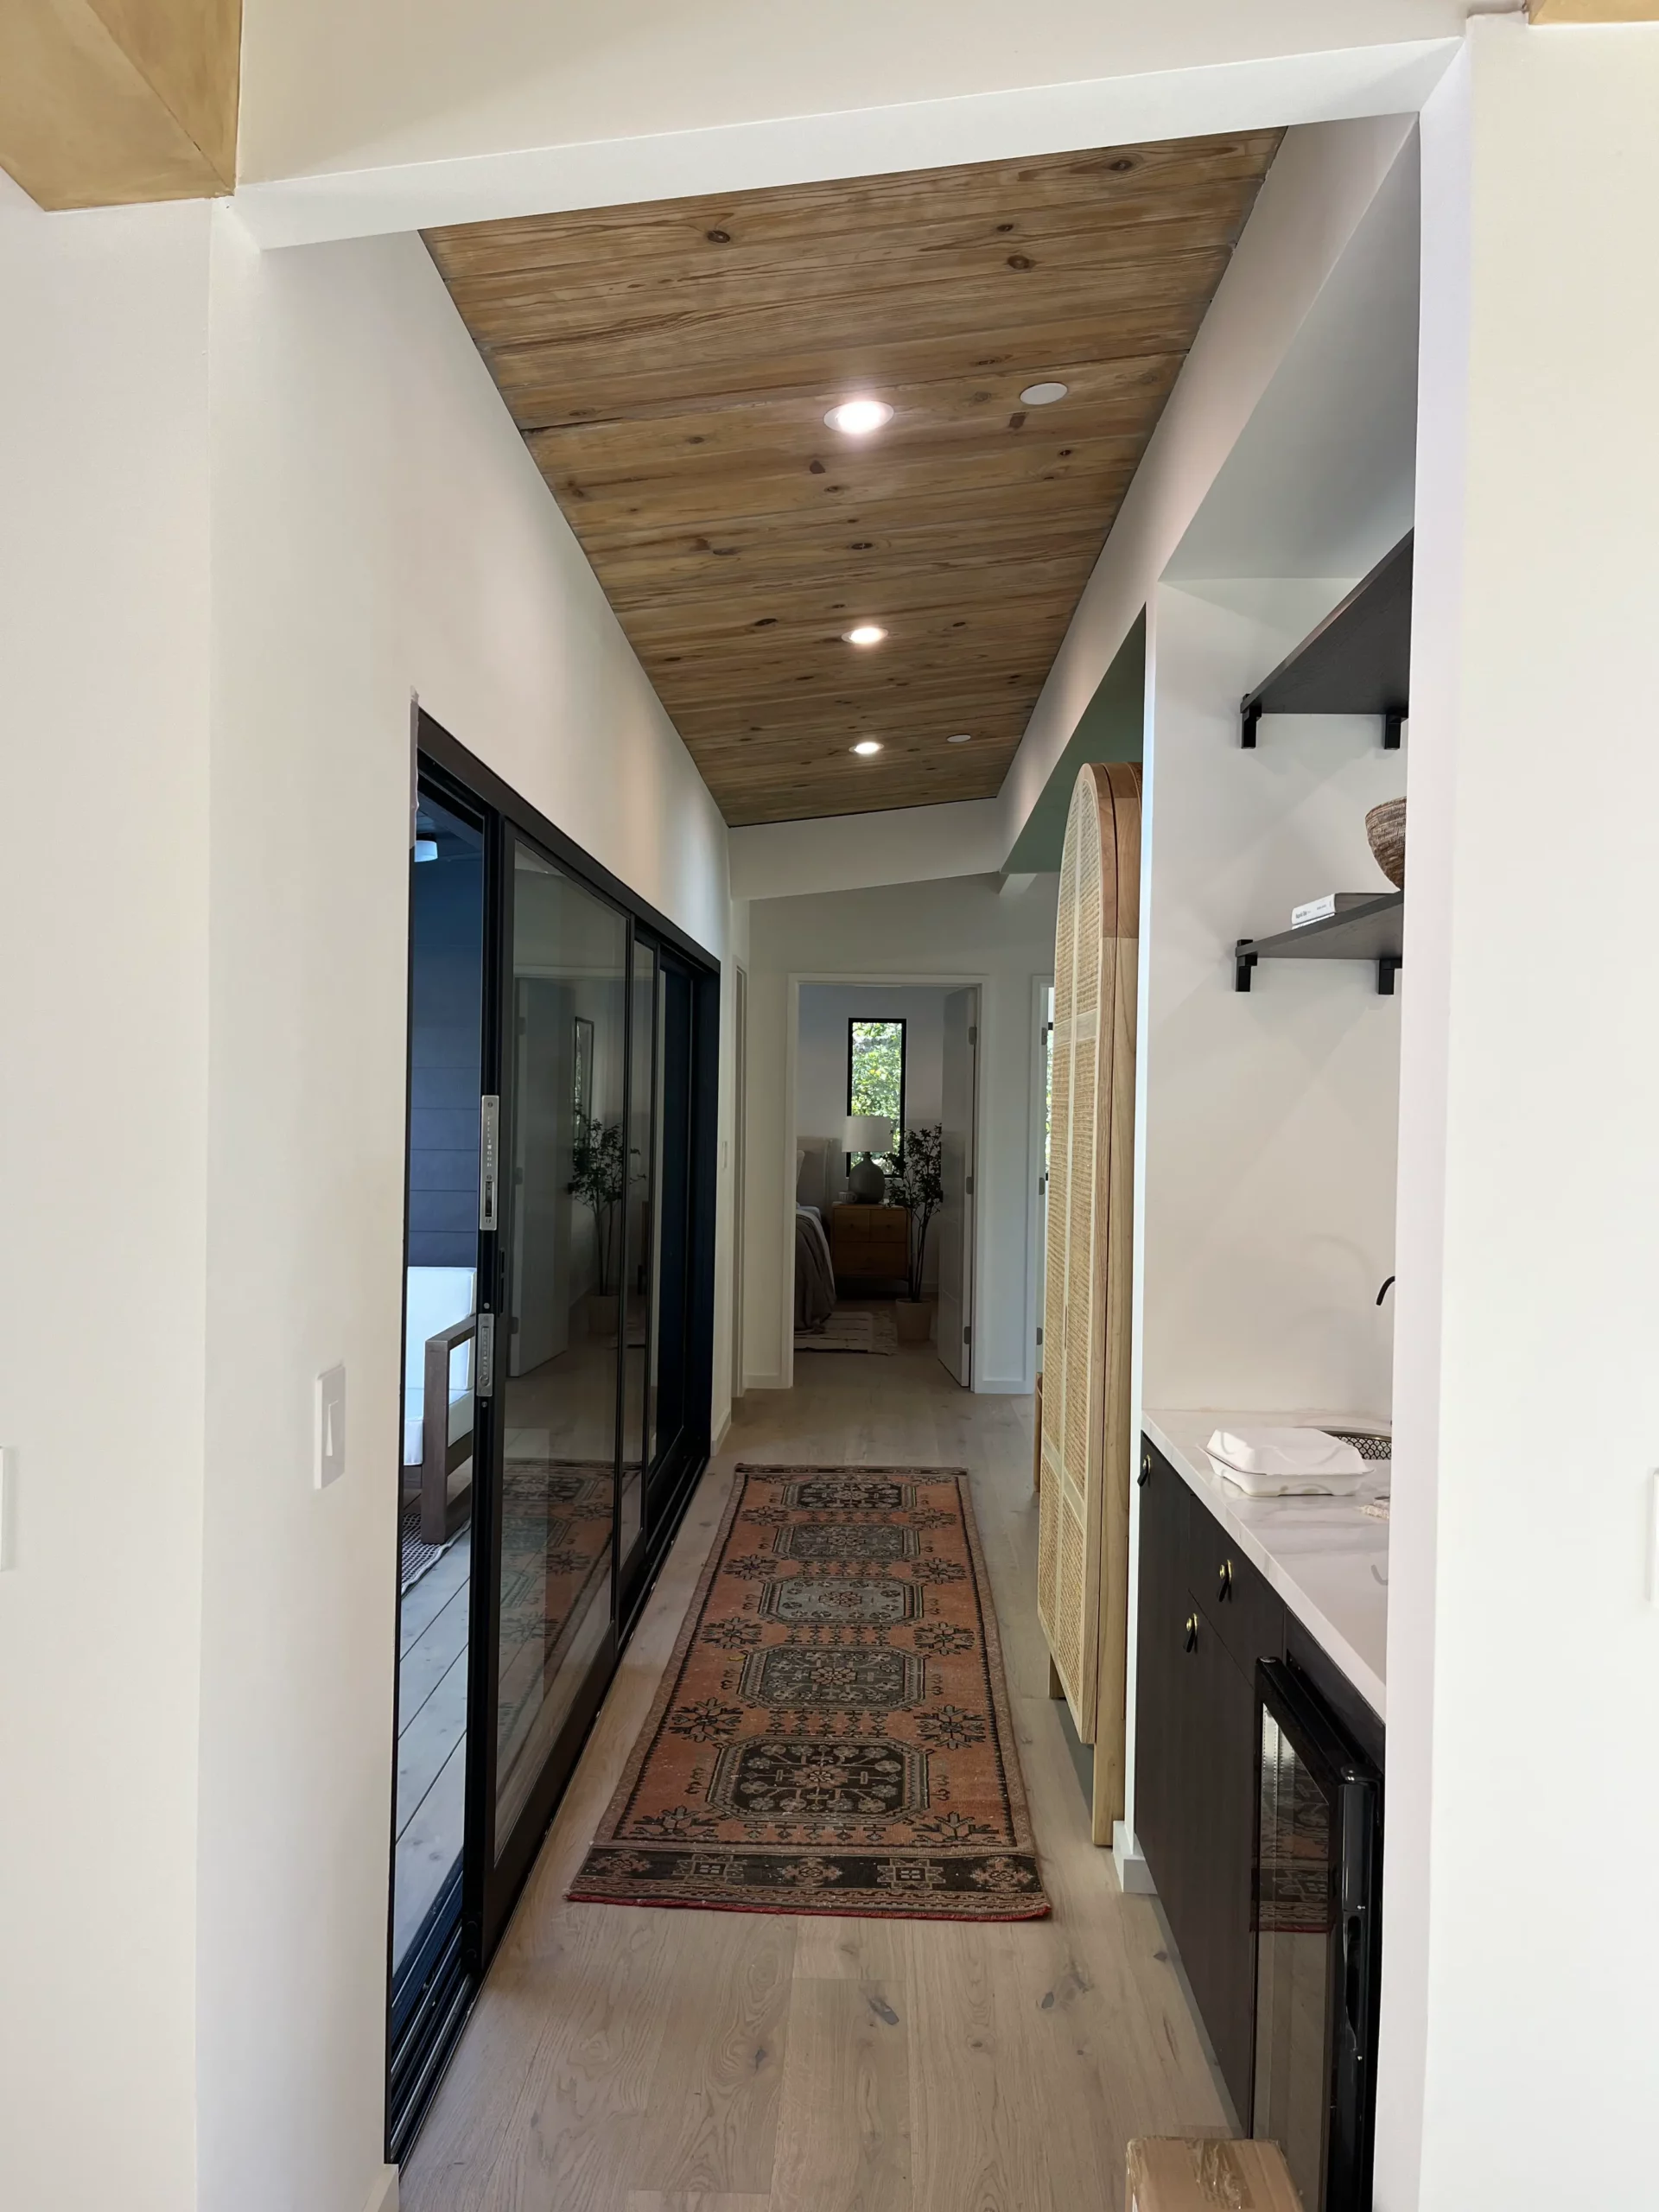 A hallway with a wooden ceiling and a rug.